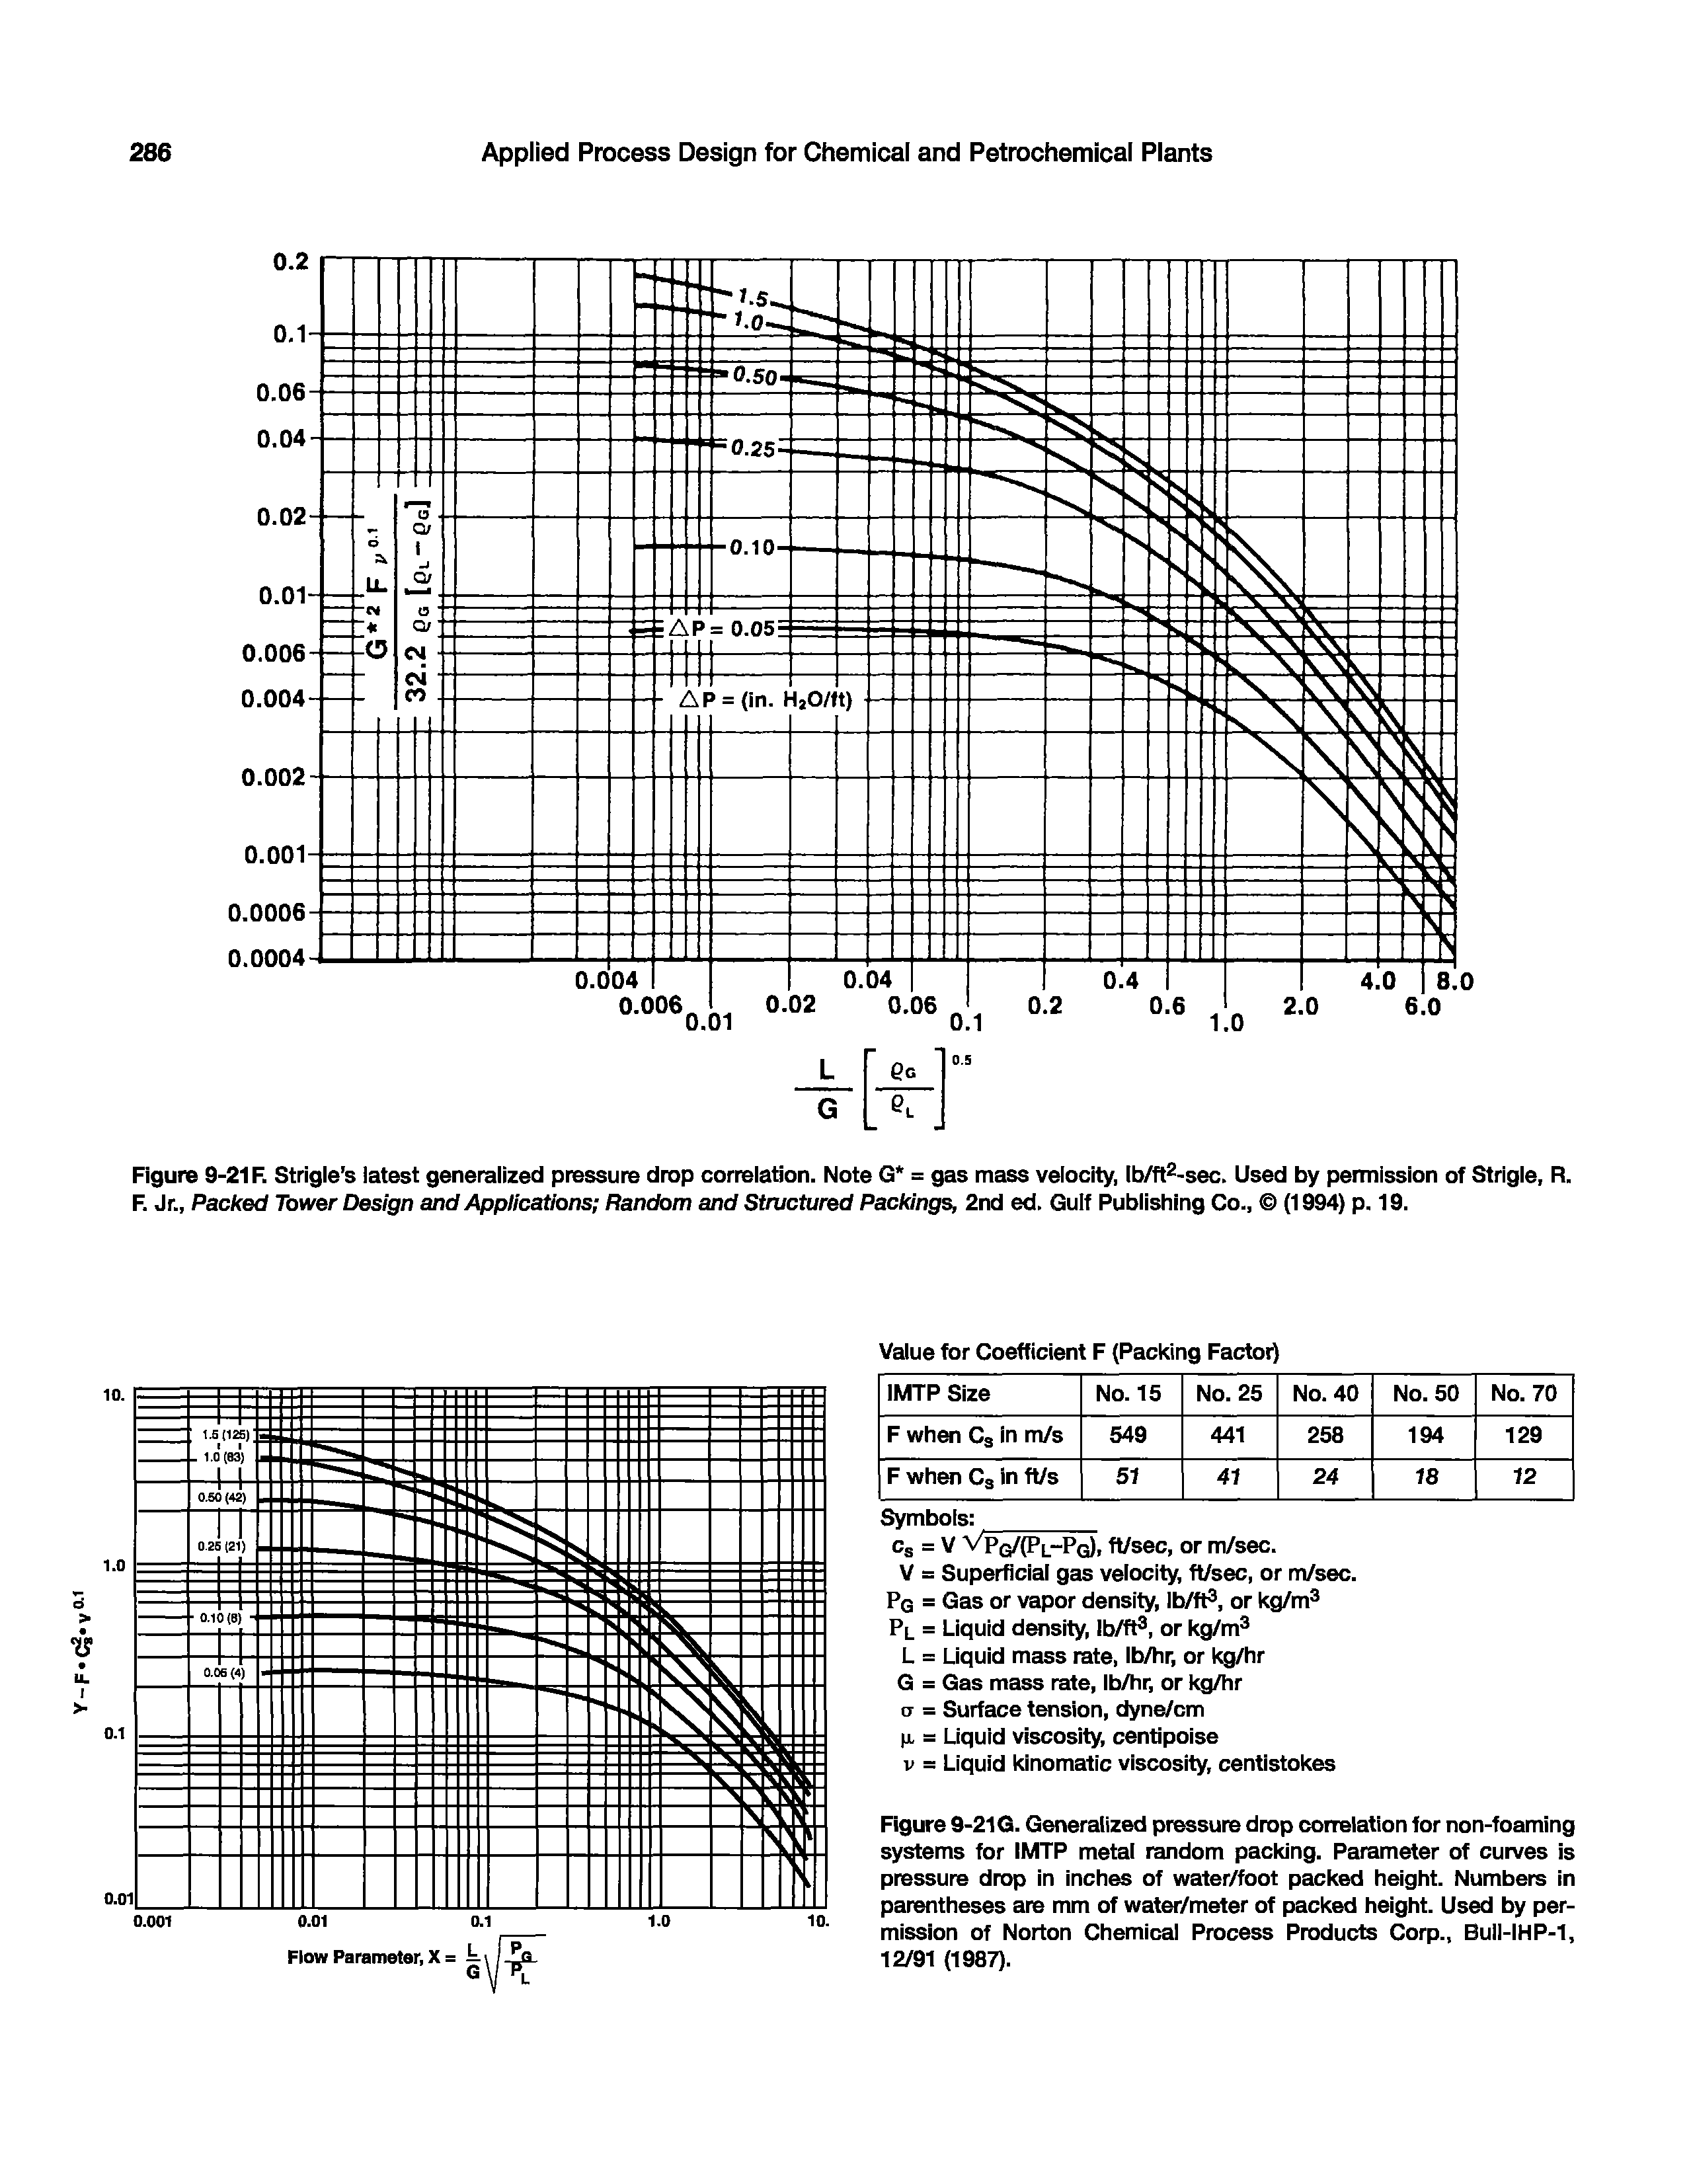 Figure 9-21G. Generalized pressure drop correlation for non-foaming systems for IMTP metal random packing. Parameter of curves is pressure drop in inches of water/foot packed height. Numbers in parentheses are mm of water/meter of packed height. Used by permission of Norton Chemical Process Products Corp., Bull-IHP-1, 12/91 (1987).